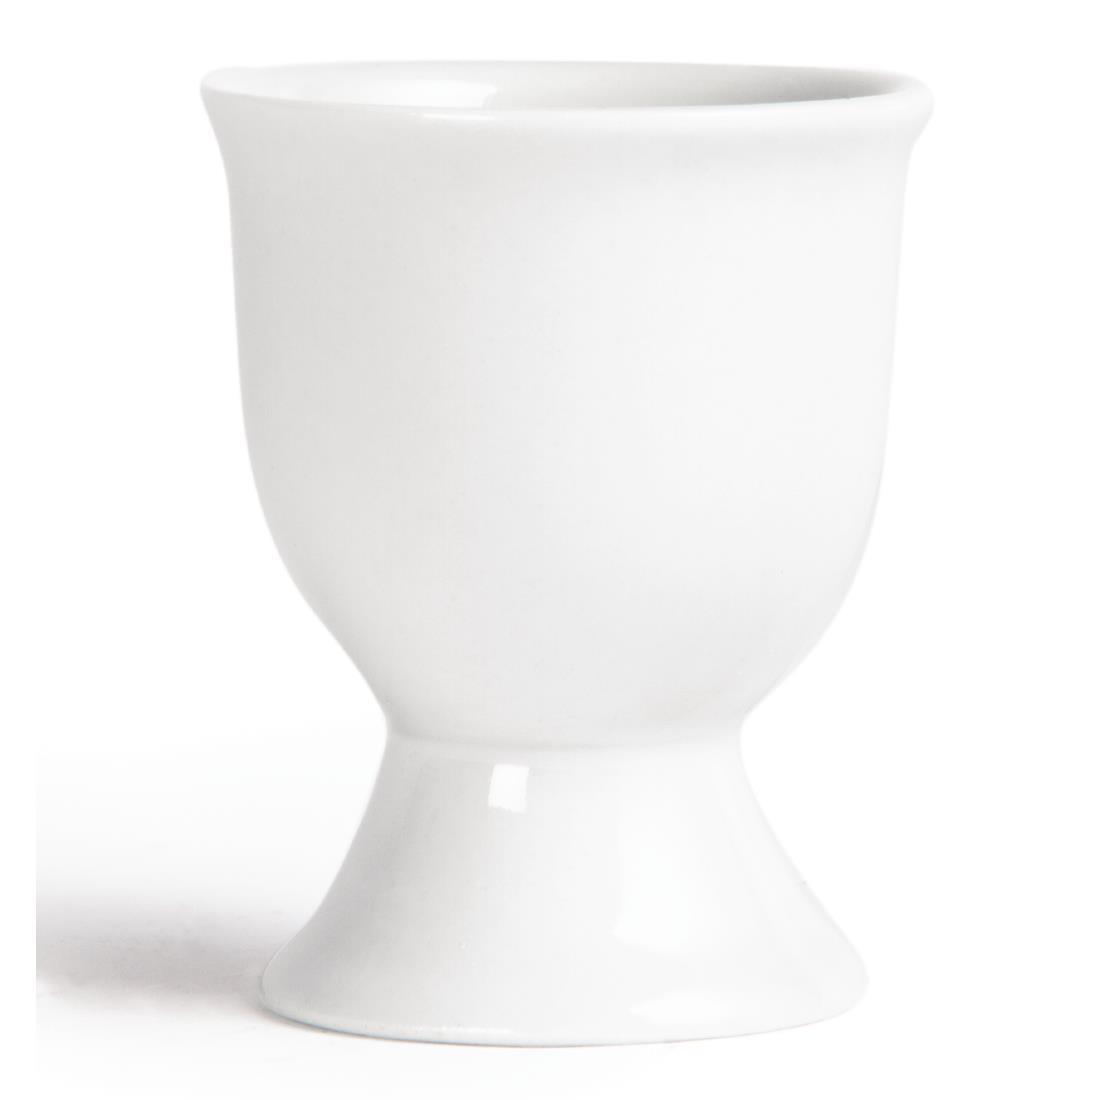 Olympia Whiteware Egg Cups 68mm (Pack of 12) - U814  - 2